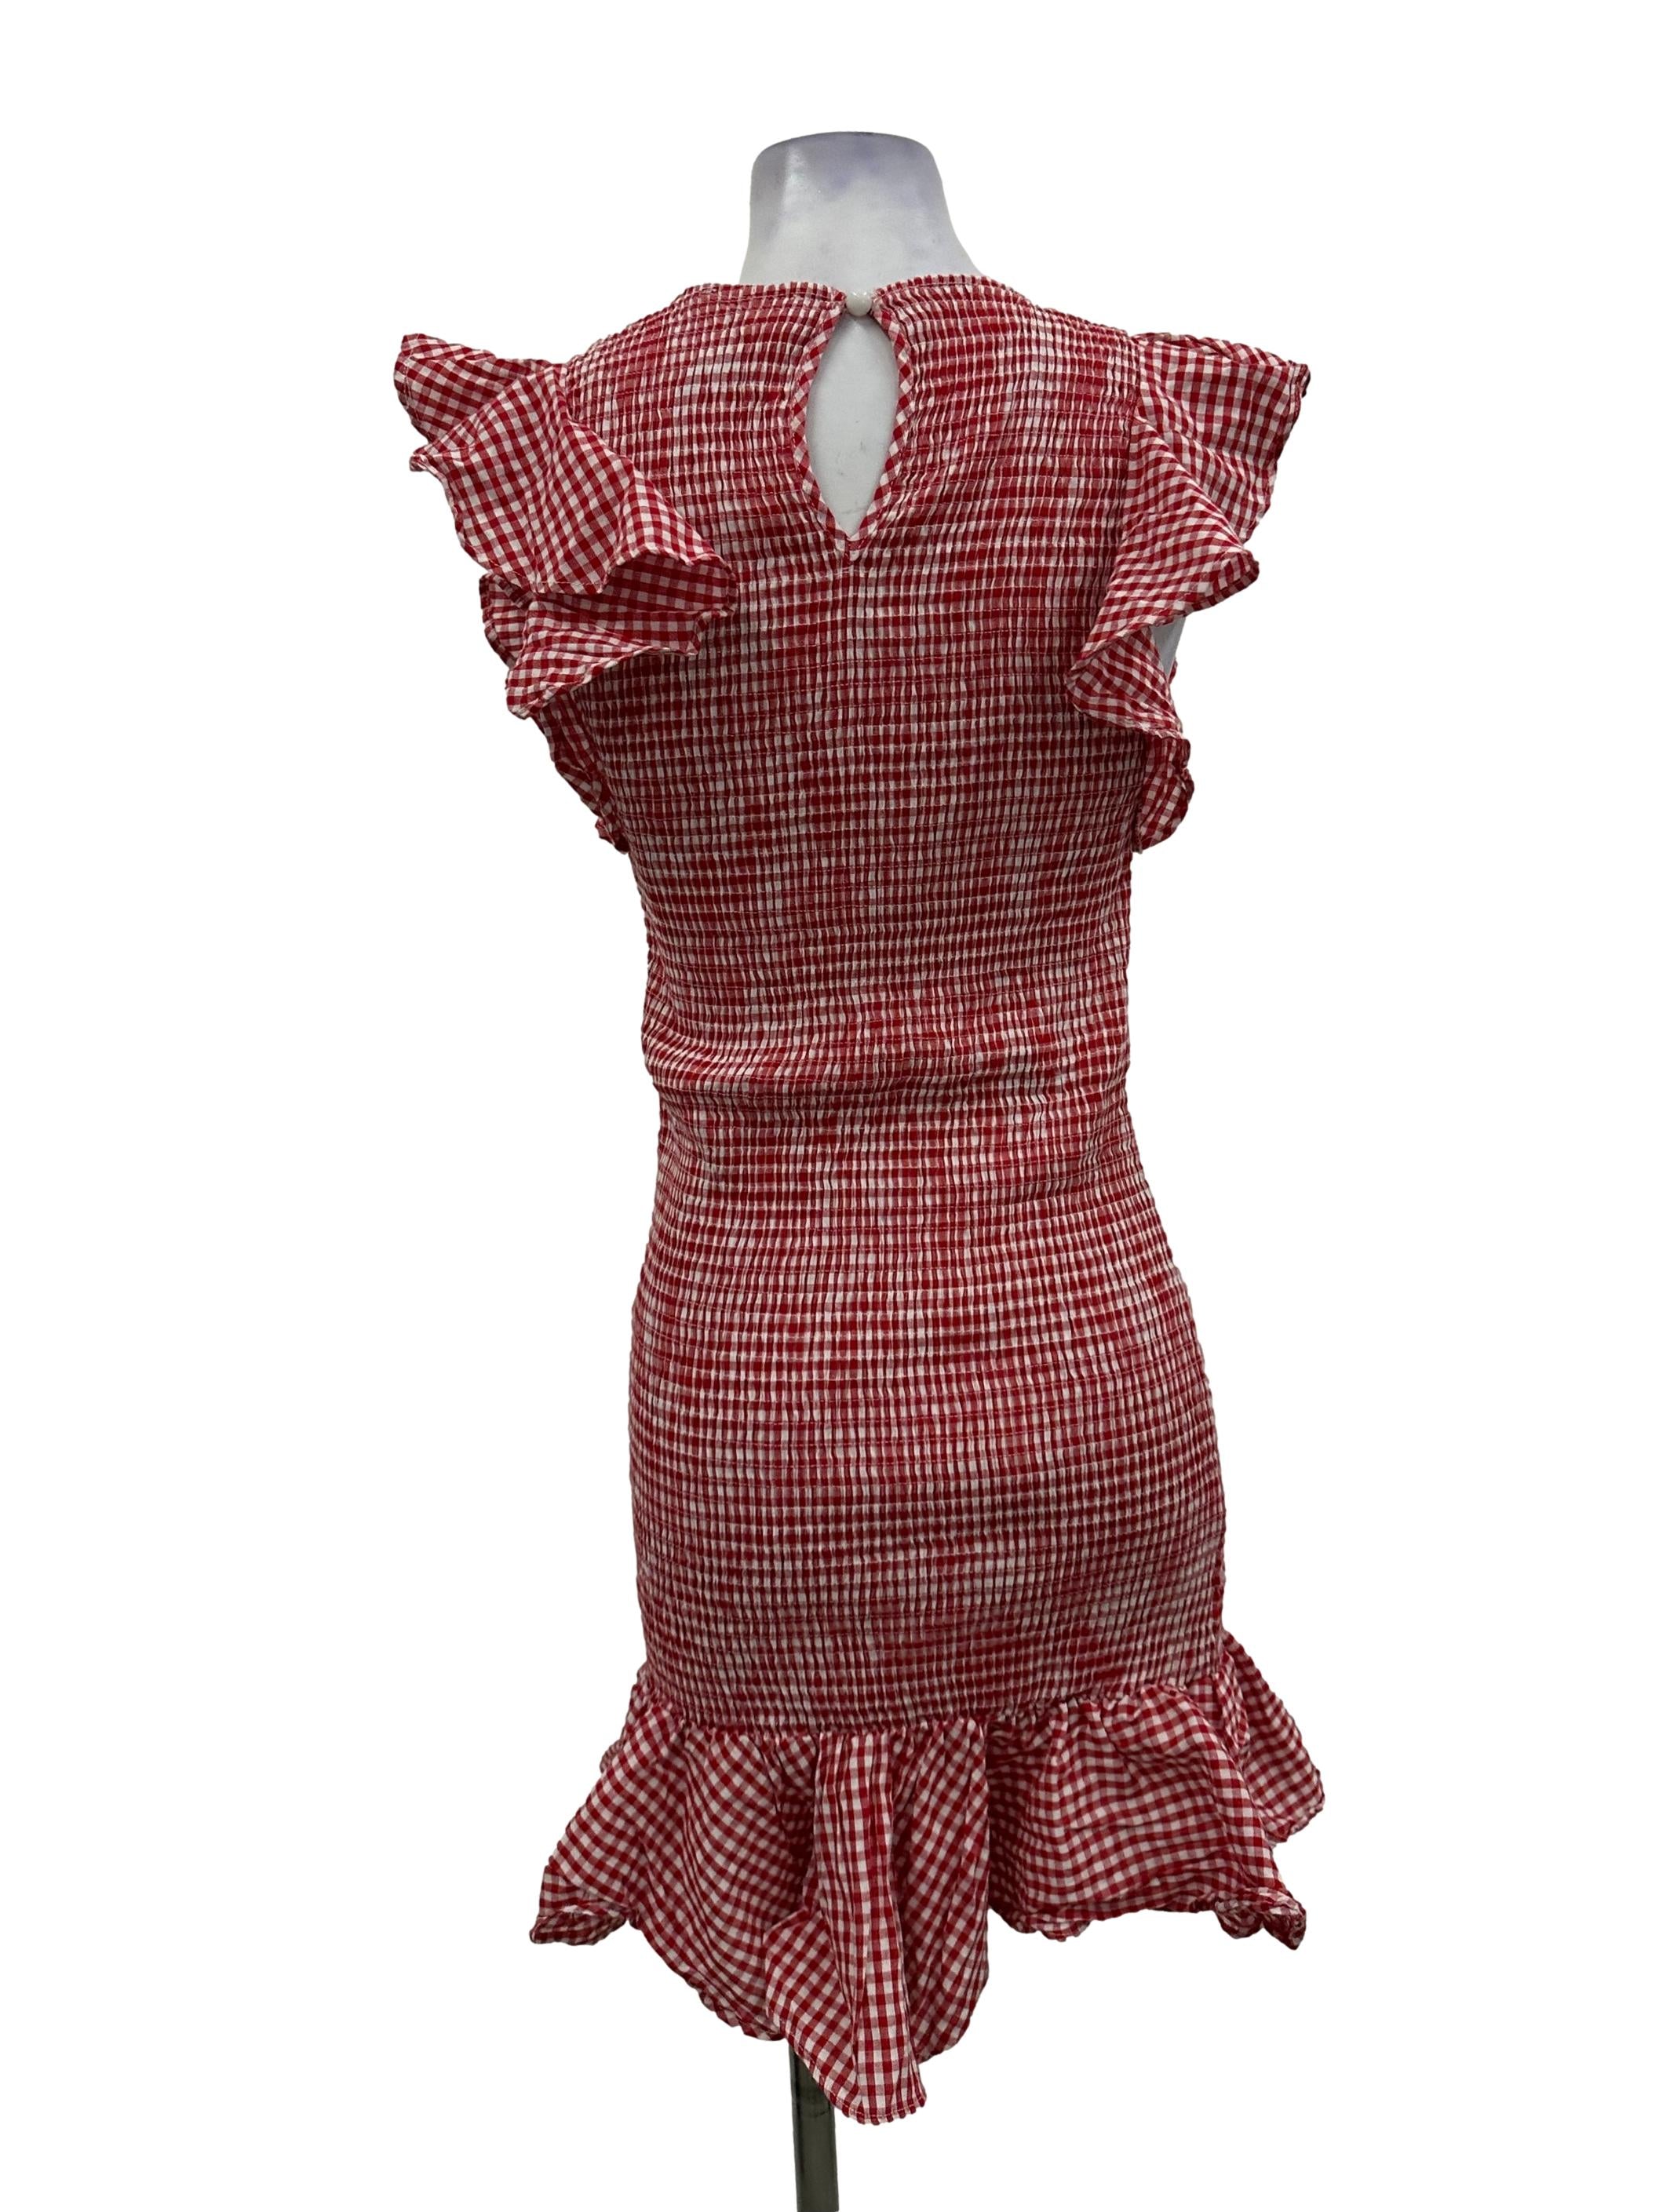 Candy Red Gingham Smocked Dress